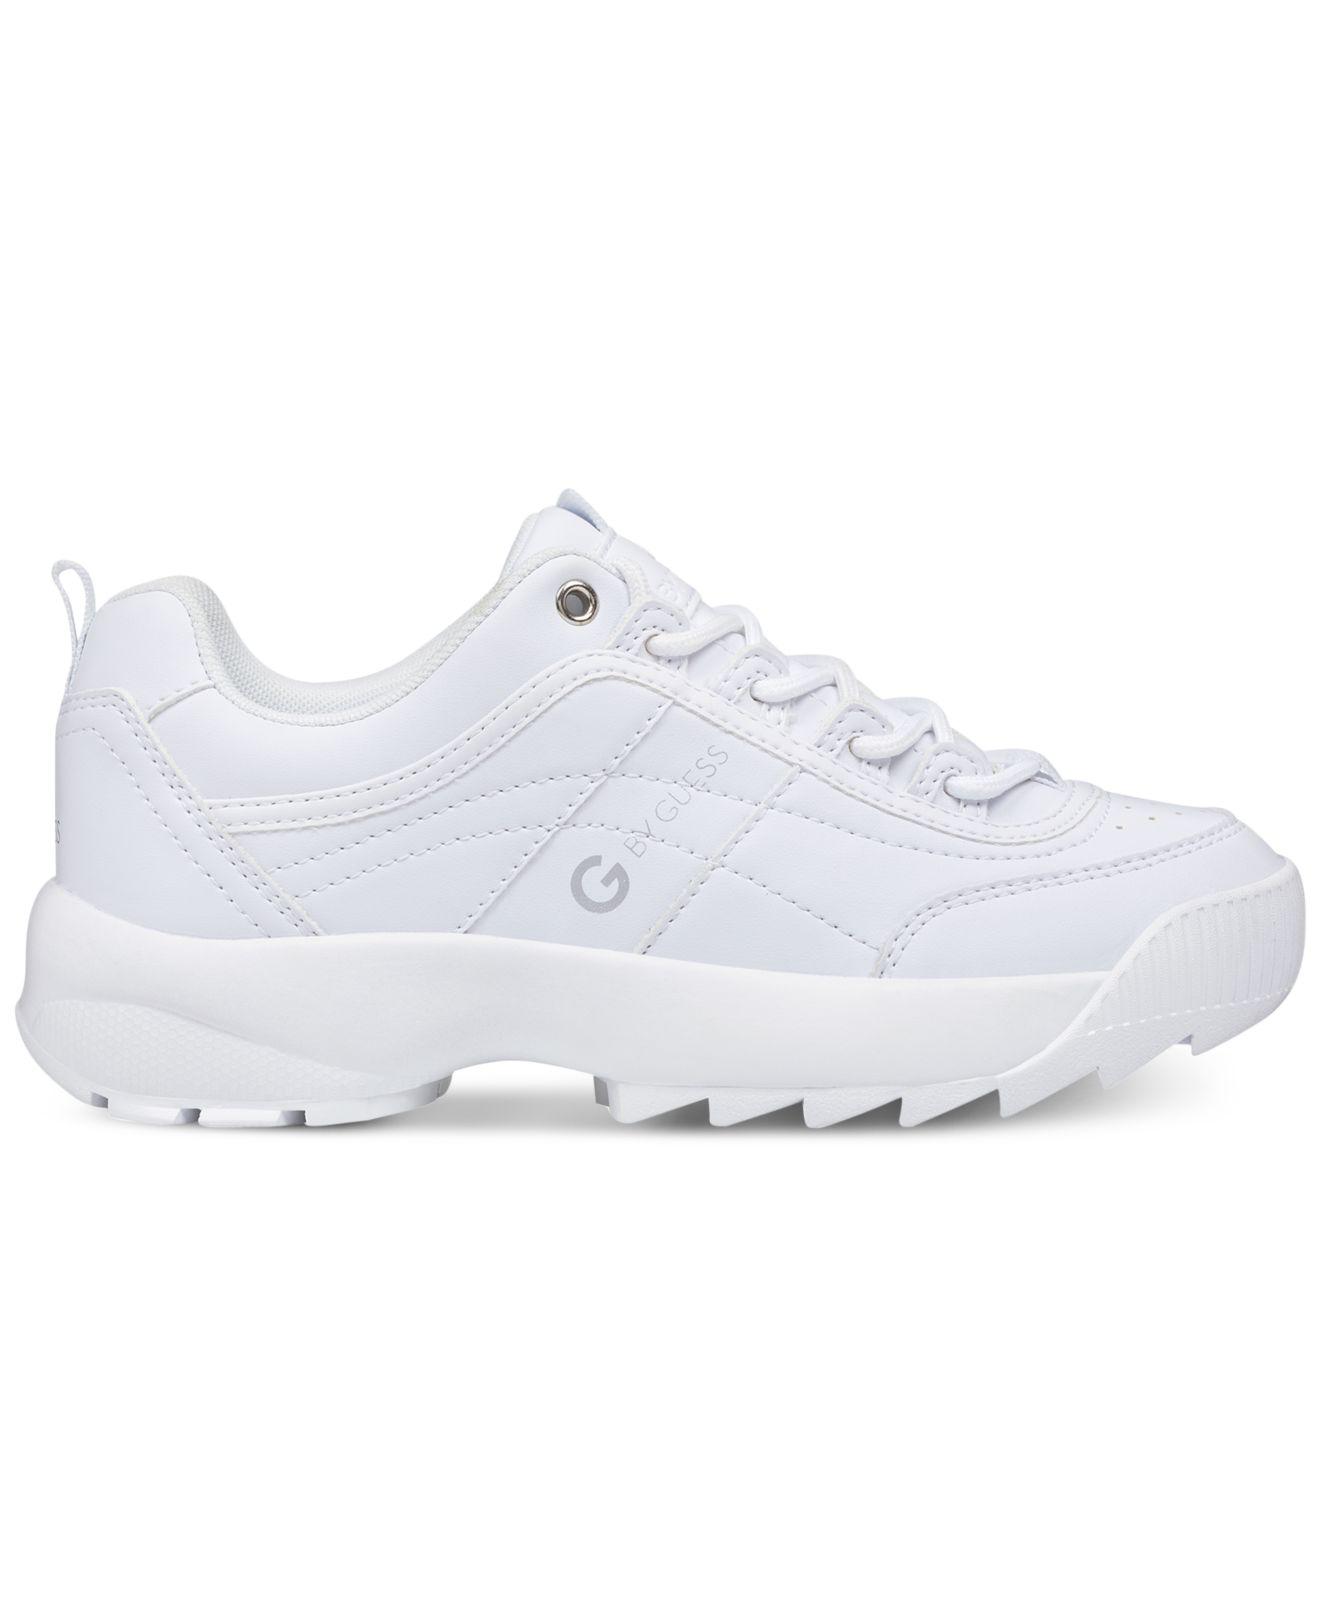 g by guess tennis shoes